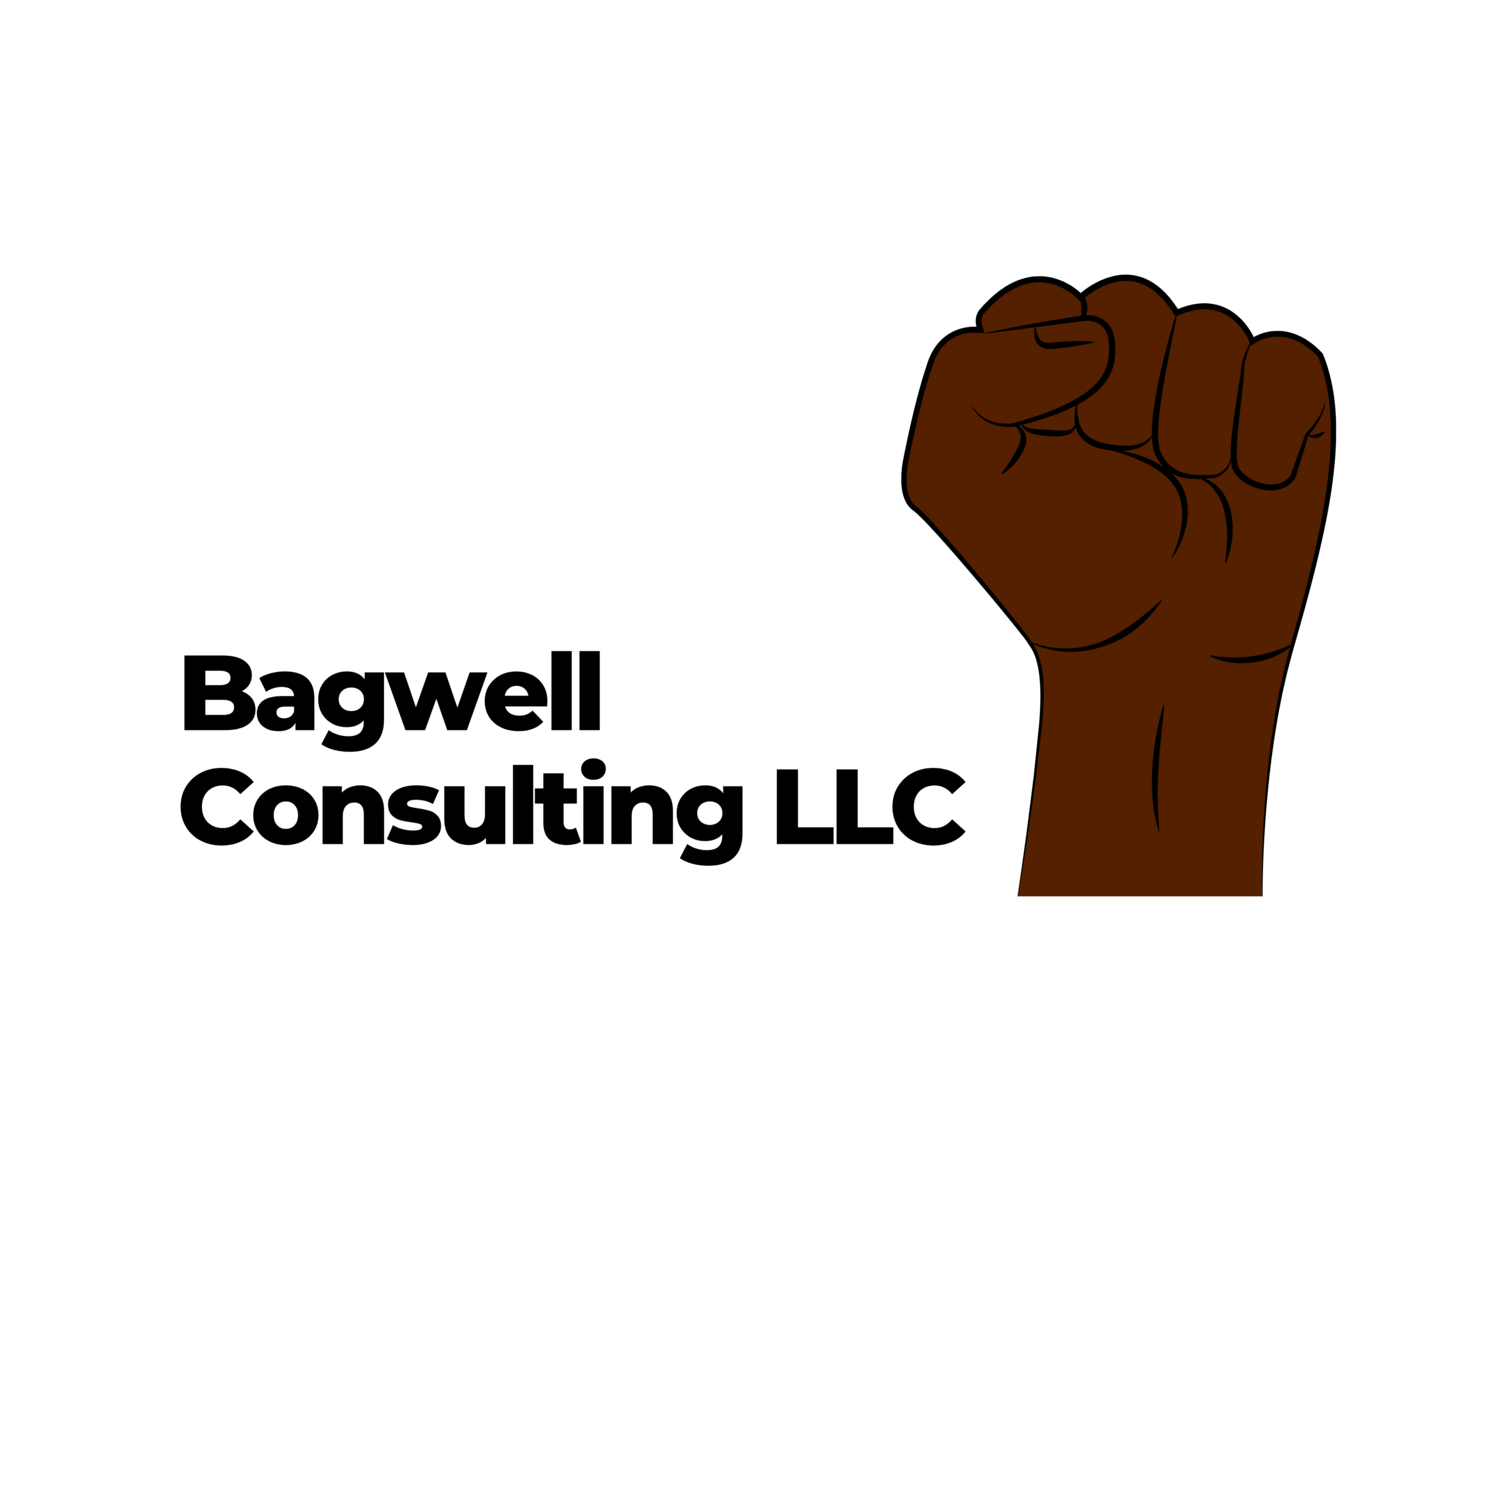 Bagwell Consulting